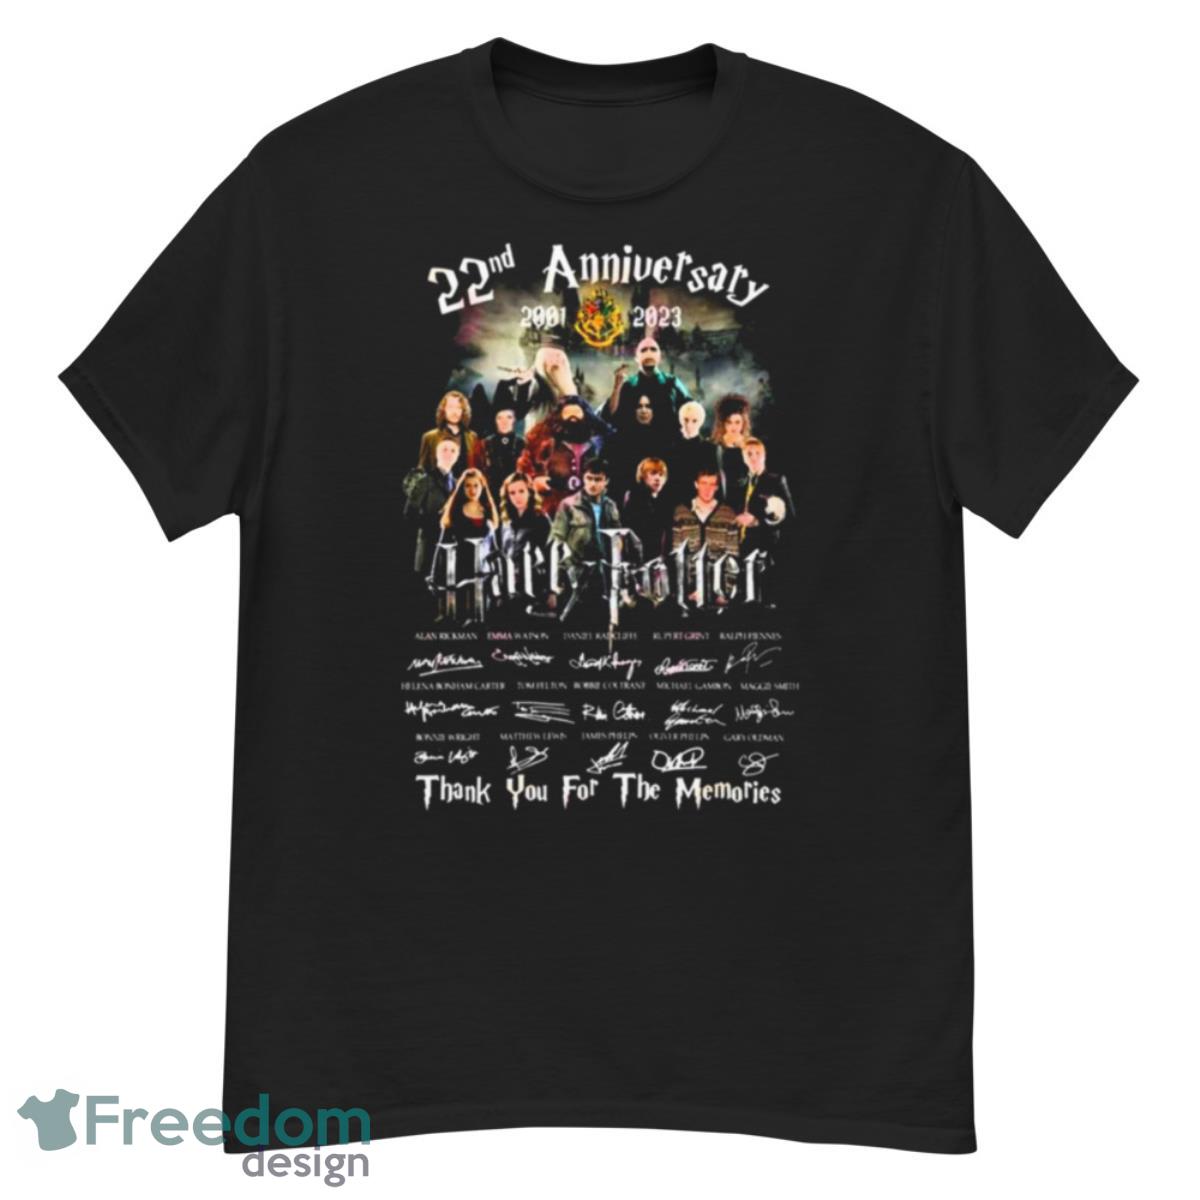 Harry Potter 22nd Anniversary 2001 – 2023 Thank You For The Memories Signatures Shirt - G500 Men’s Classic T-Shirt